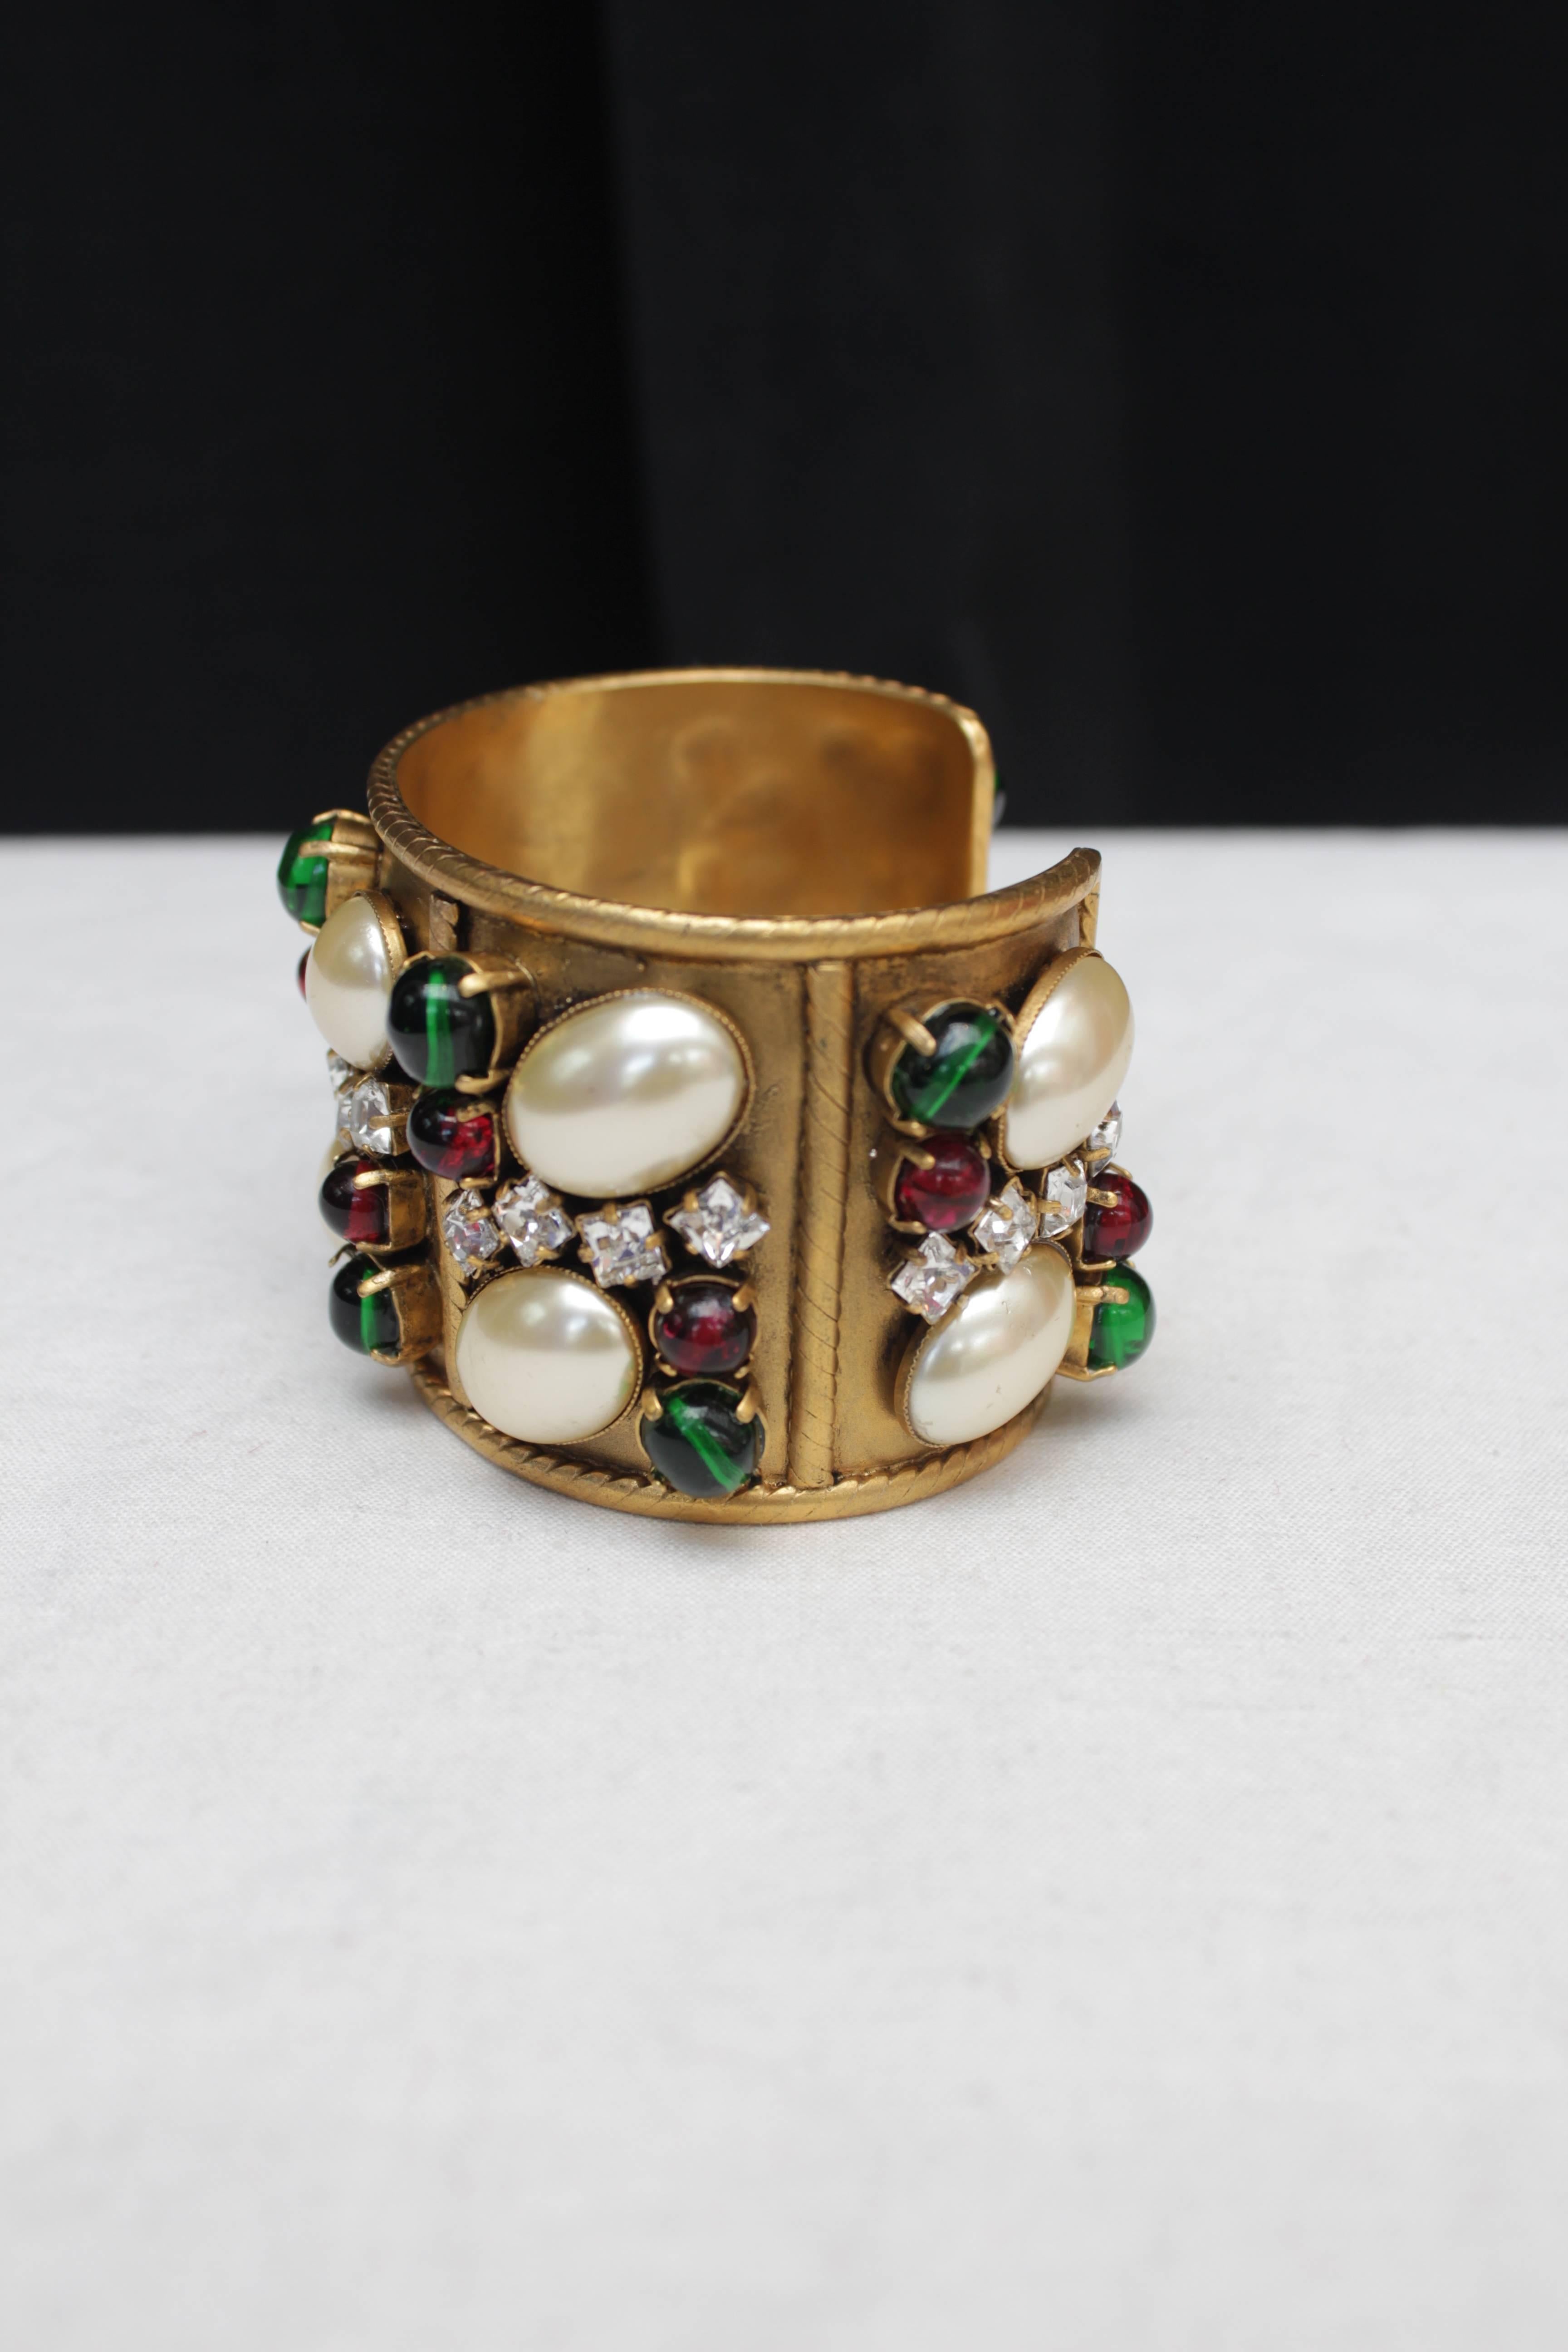 CHANEL (Made in France) Beautiful cuff in patinated gilt metal paved with emerald and ruby colored glass cabochons, faux-pearl cabochons and square white rhinestones.

Collection 2 5 from the early 1990s.

Very good condition (one cabochon